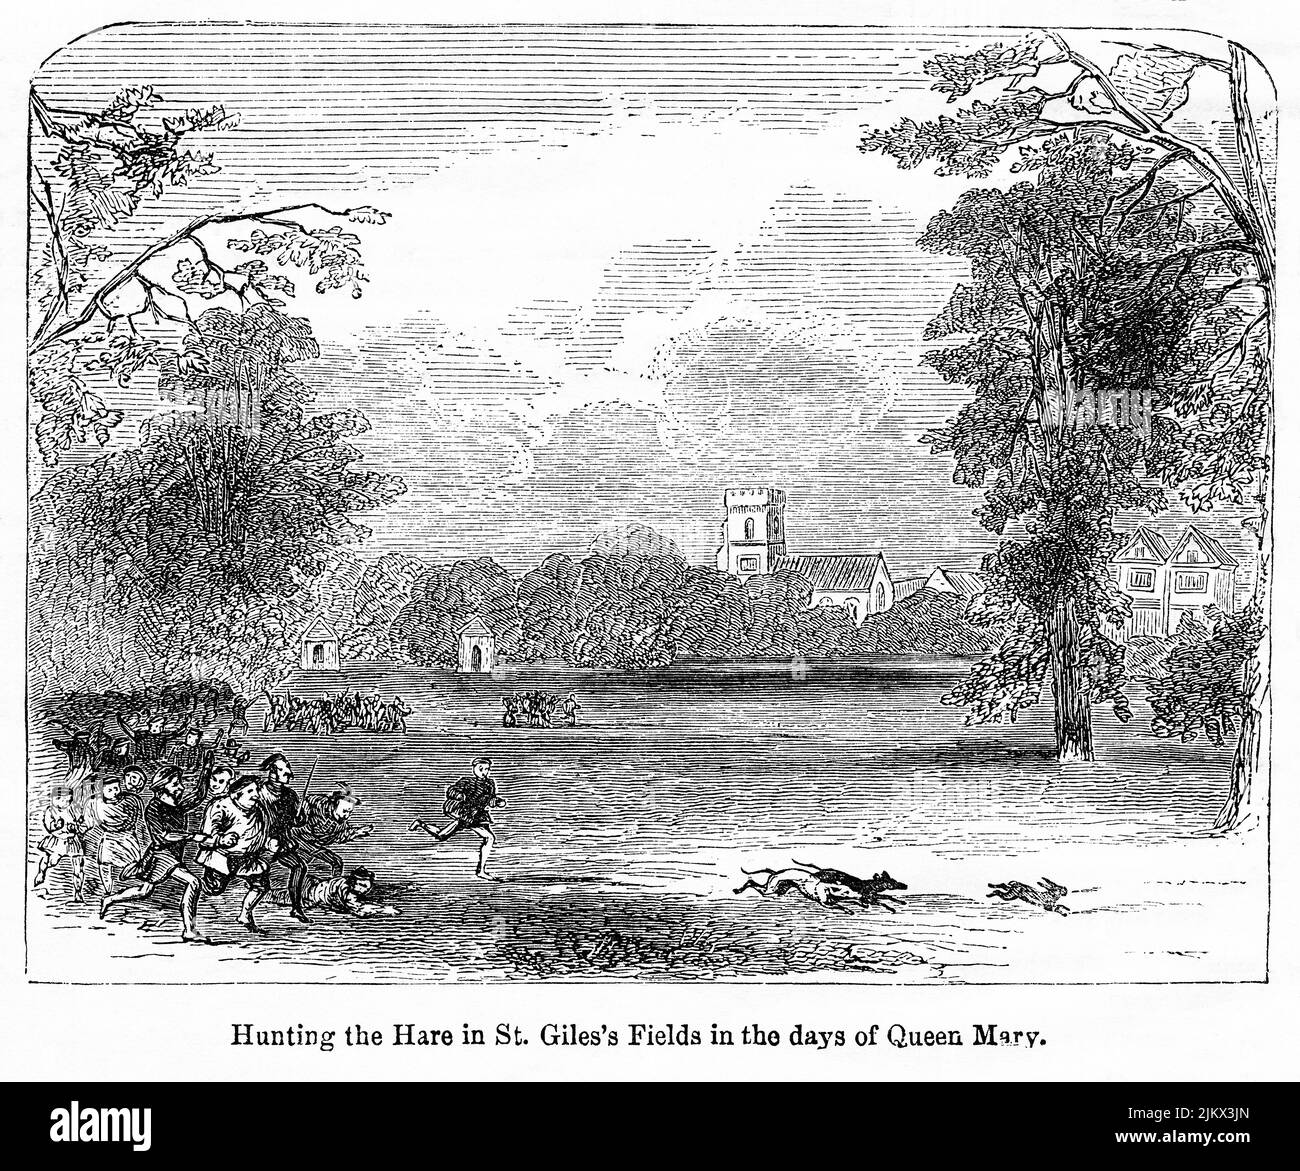 Hunting the Hare in St. Giles’s Fields in the days of Queen Mary, Illustration from the Book, 'John Cassel’s Illustrated History of England, Volume II', text by William Howitt, Cassell, Petter, and Galpin, London, 1858 Stock Photo